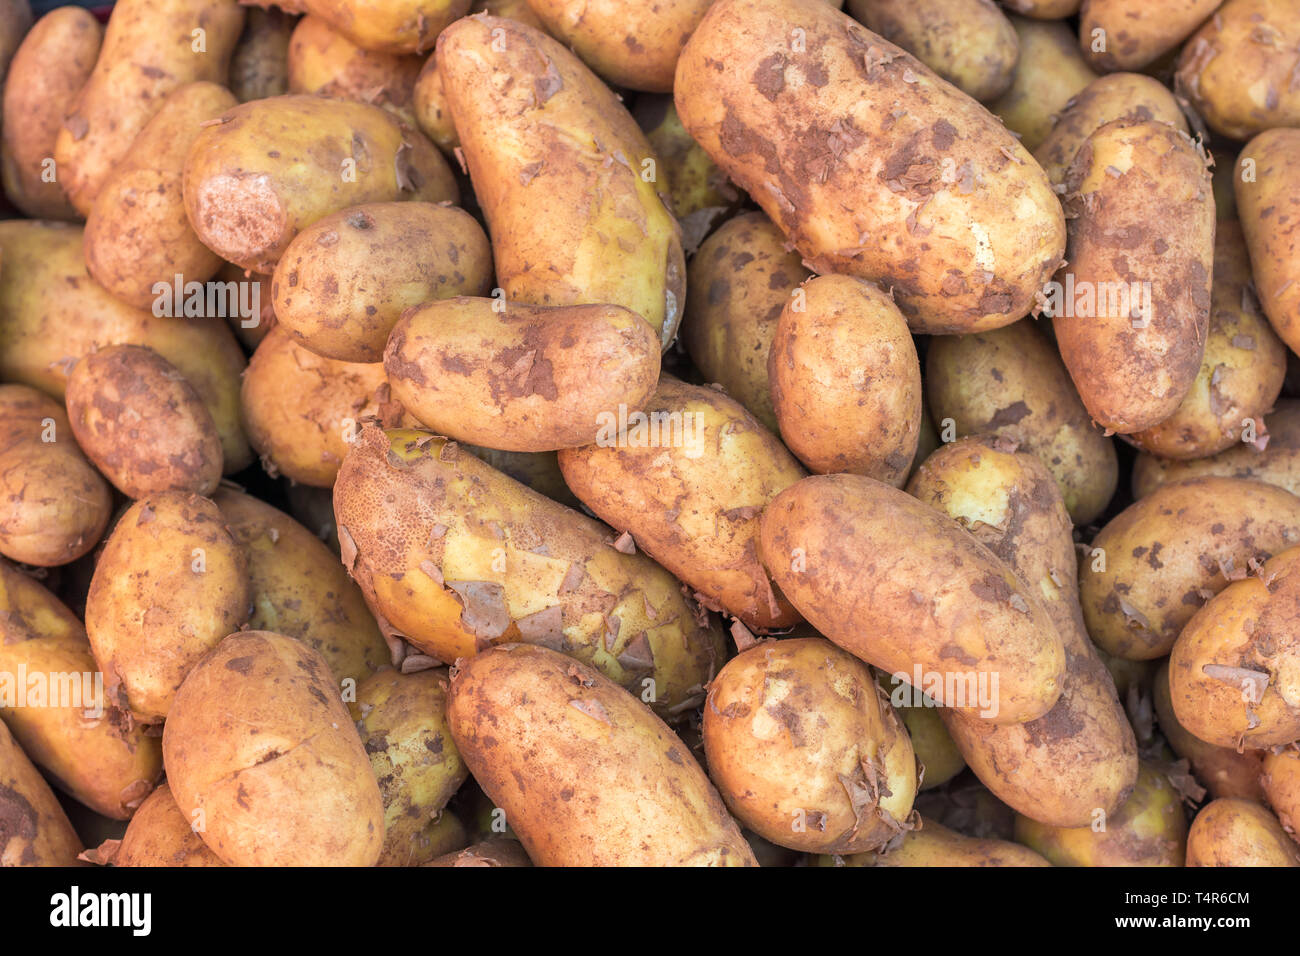 Tubers of potatoes after harvest Stock Photo